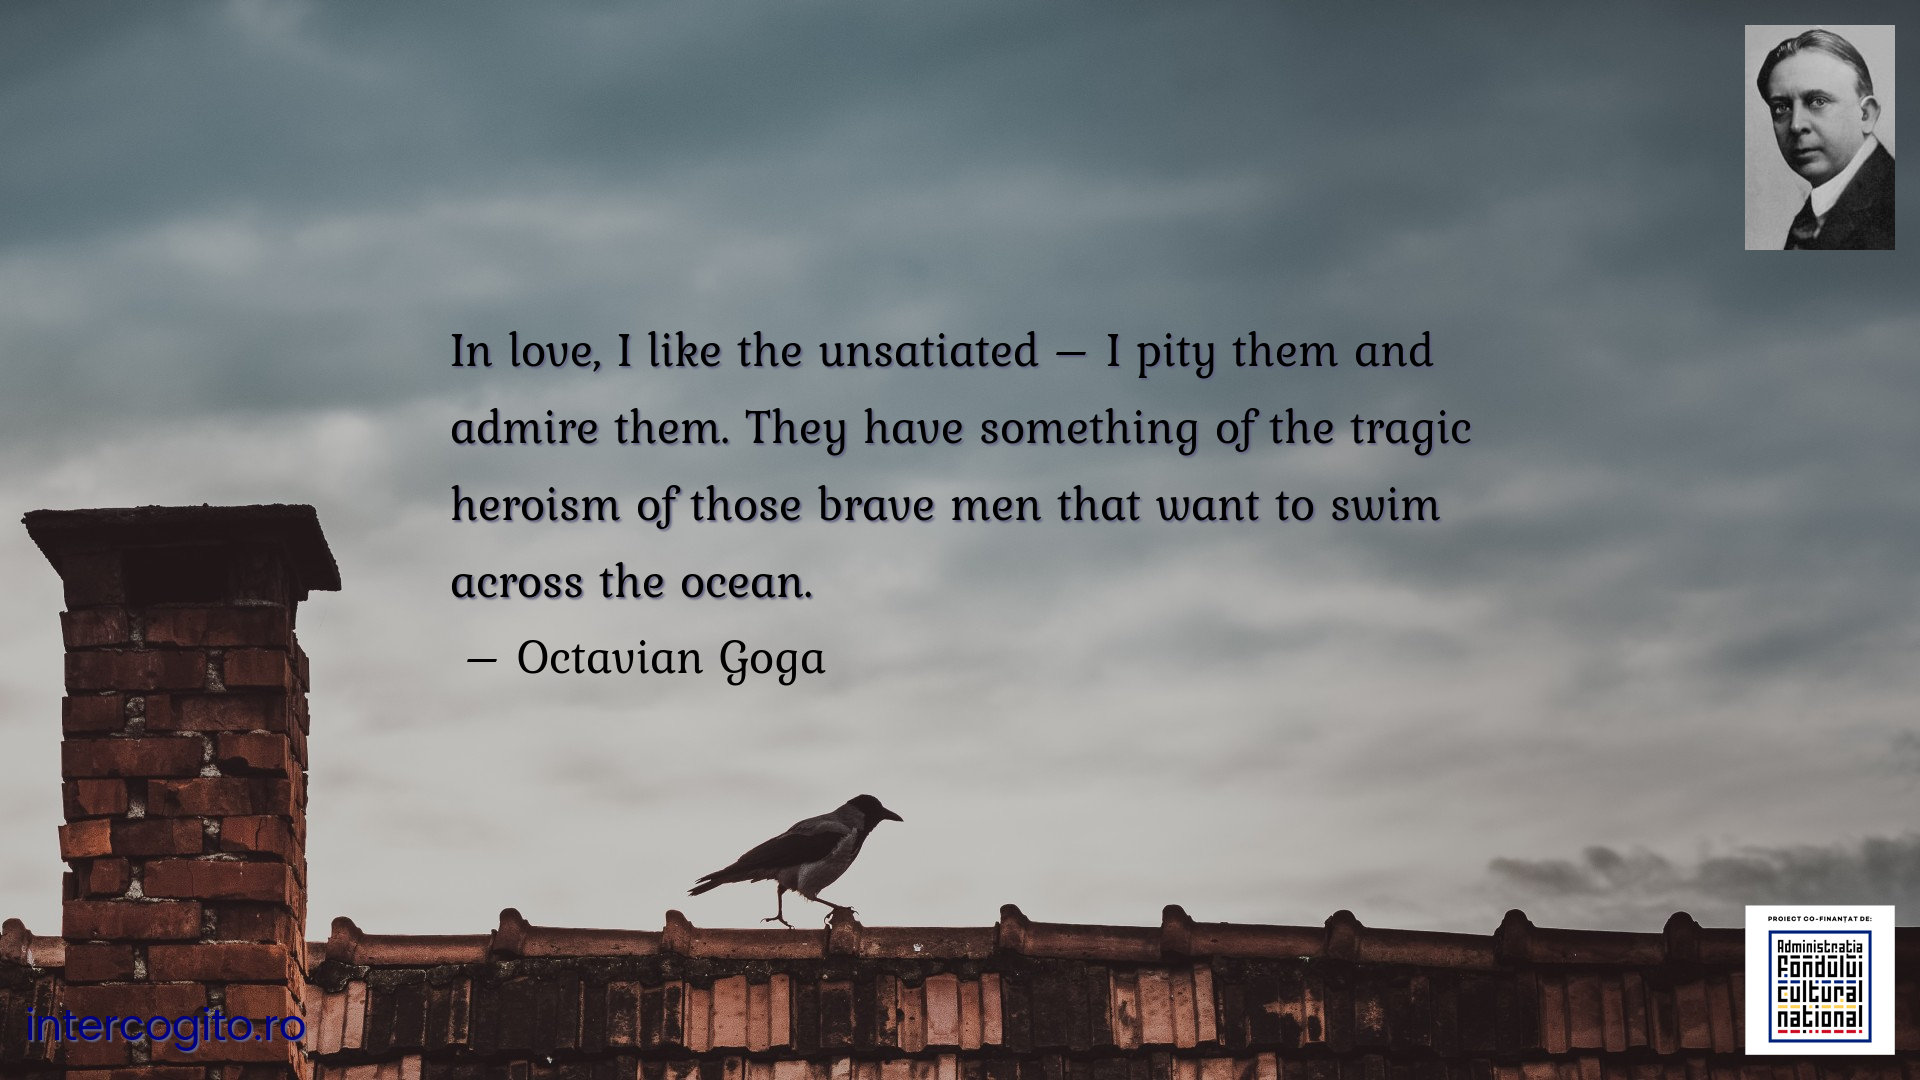 In love, I like the unsatiated – I pity them and admire them. They have something of the tragic heroism of those brave men that want to swim across the ocean.